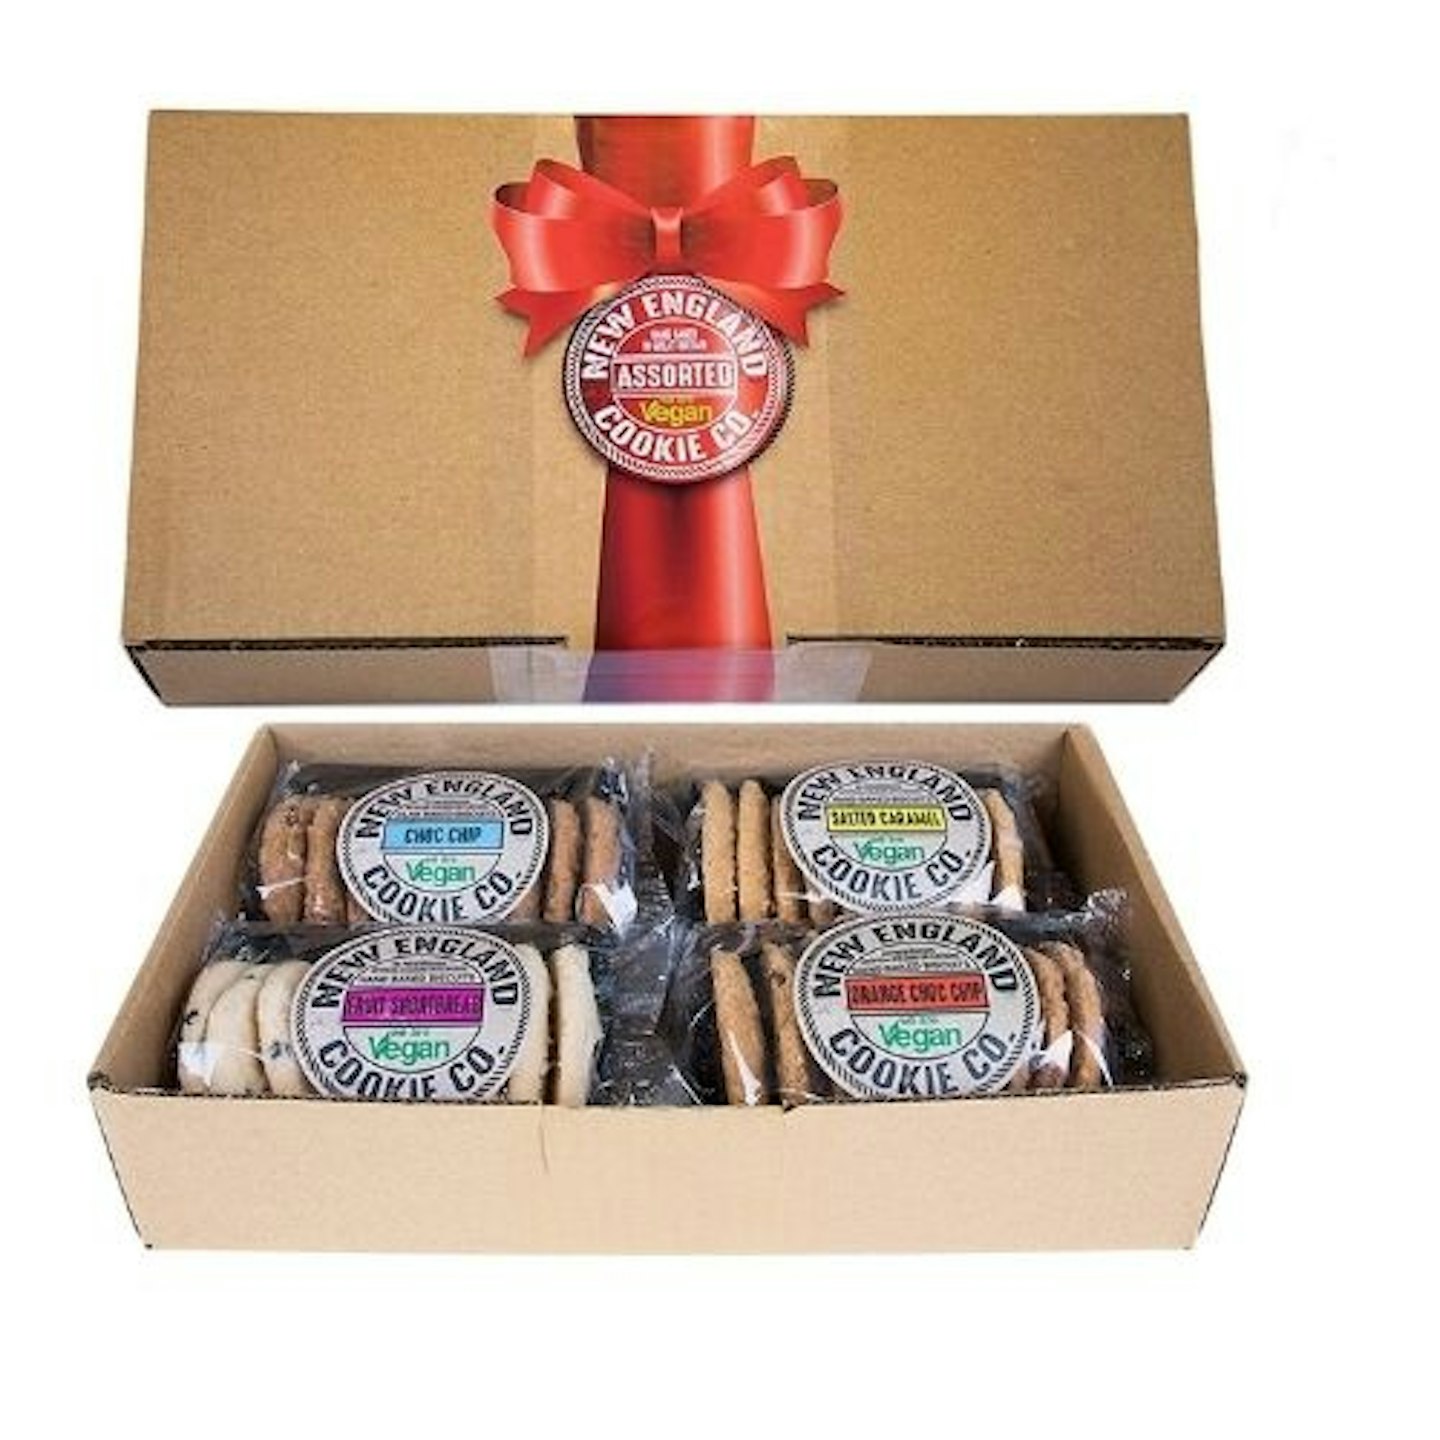 New England Cookie Co. Hand Baked Biscuits Assortment